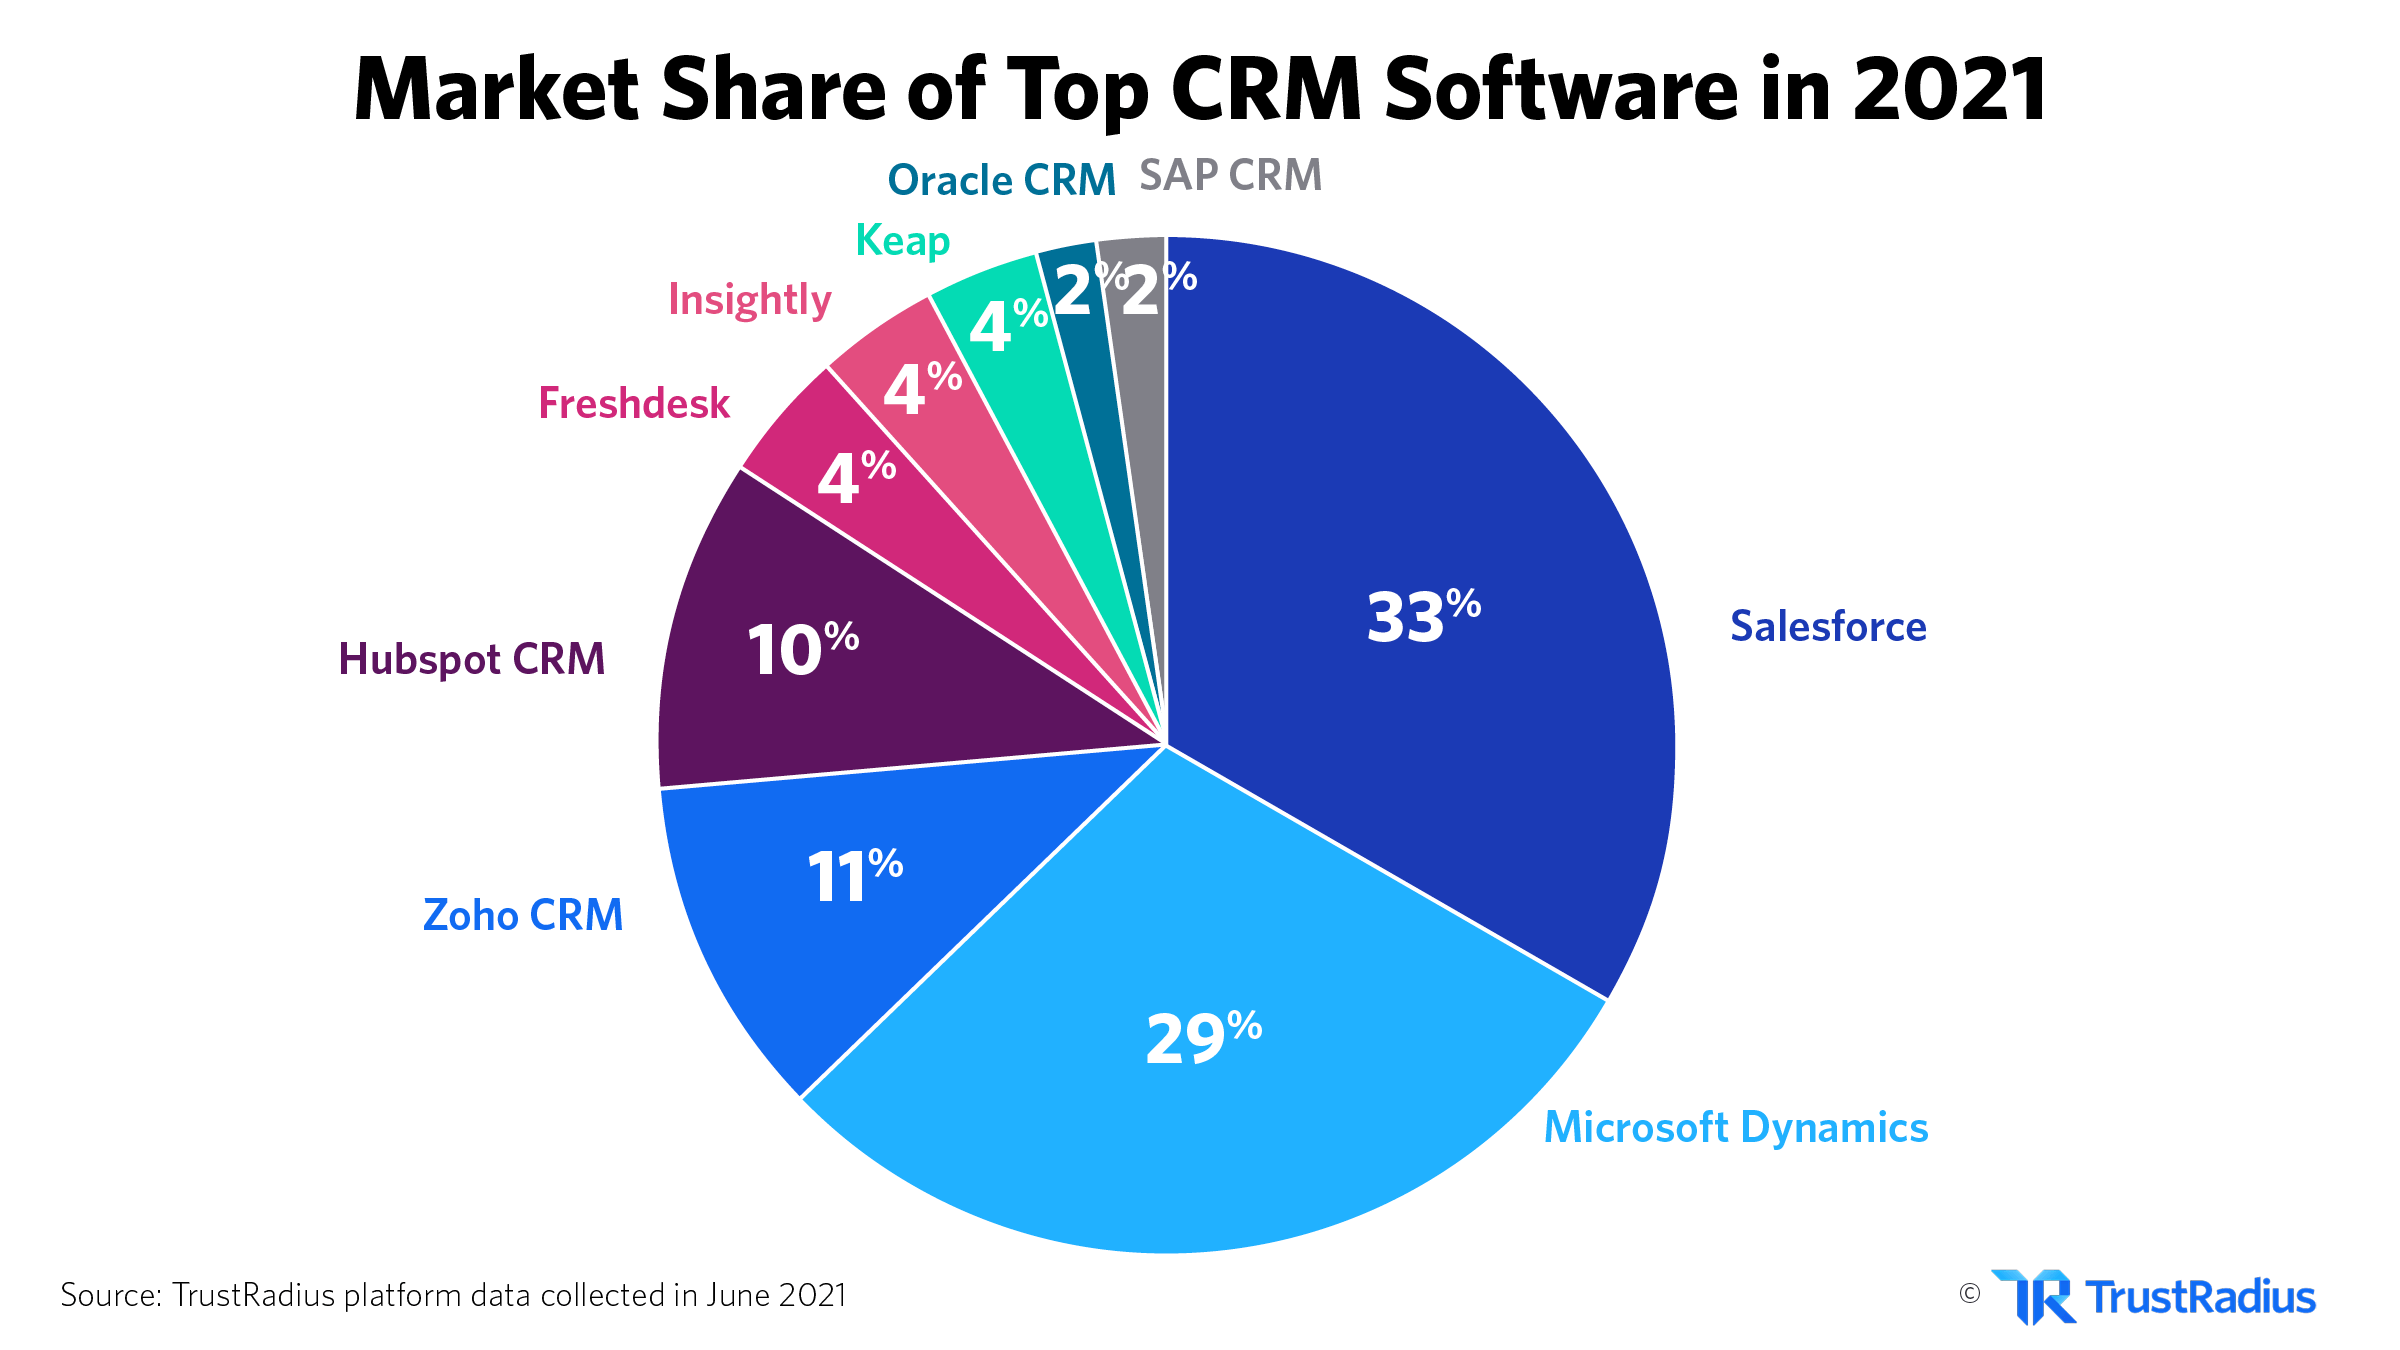 MArket Share of top crm software in 2021